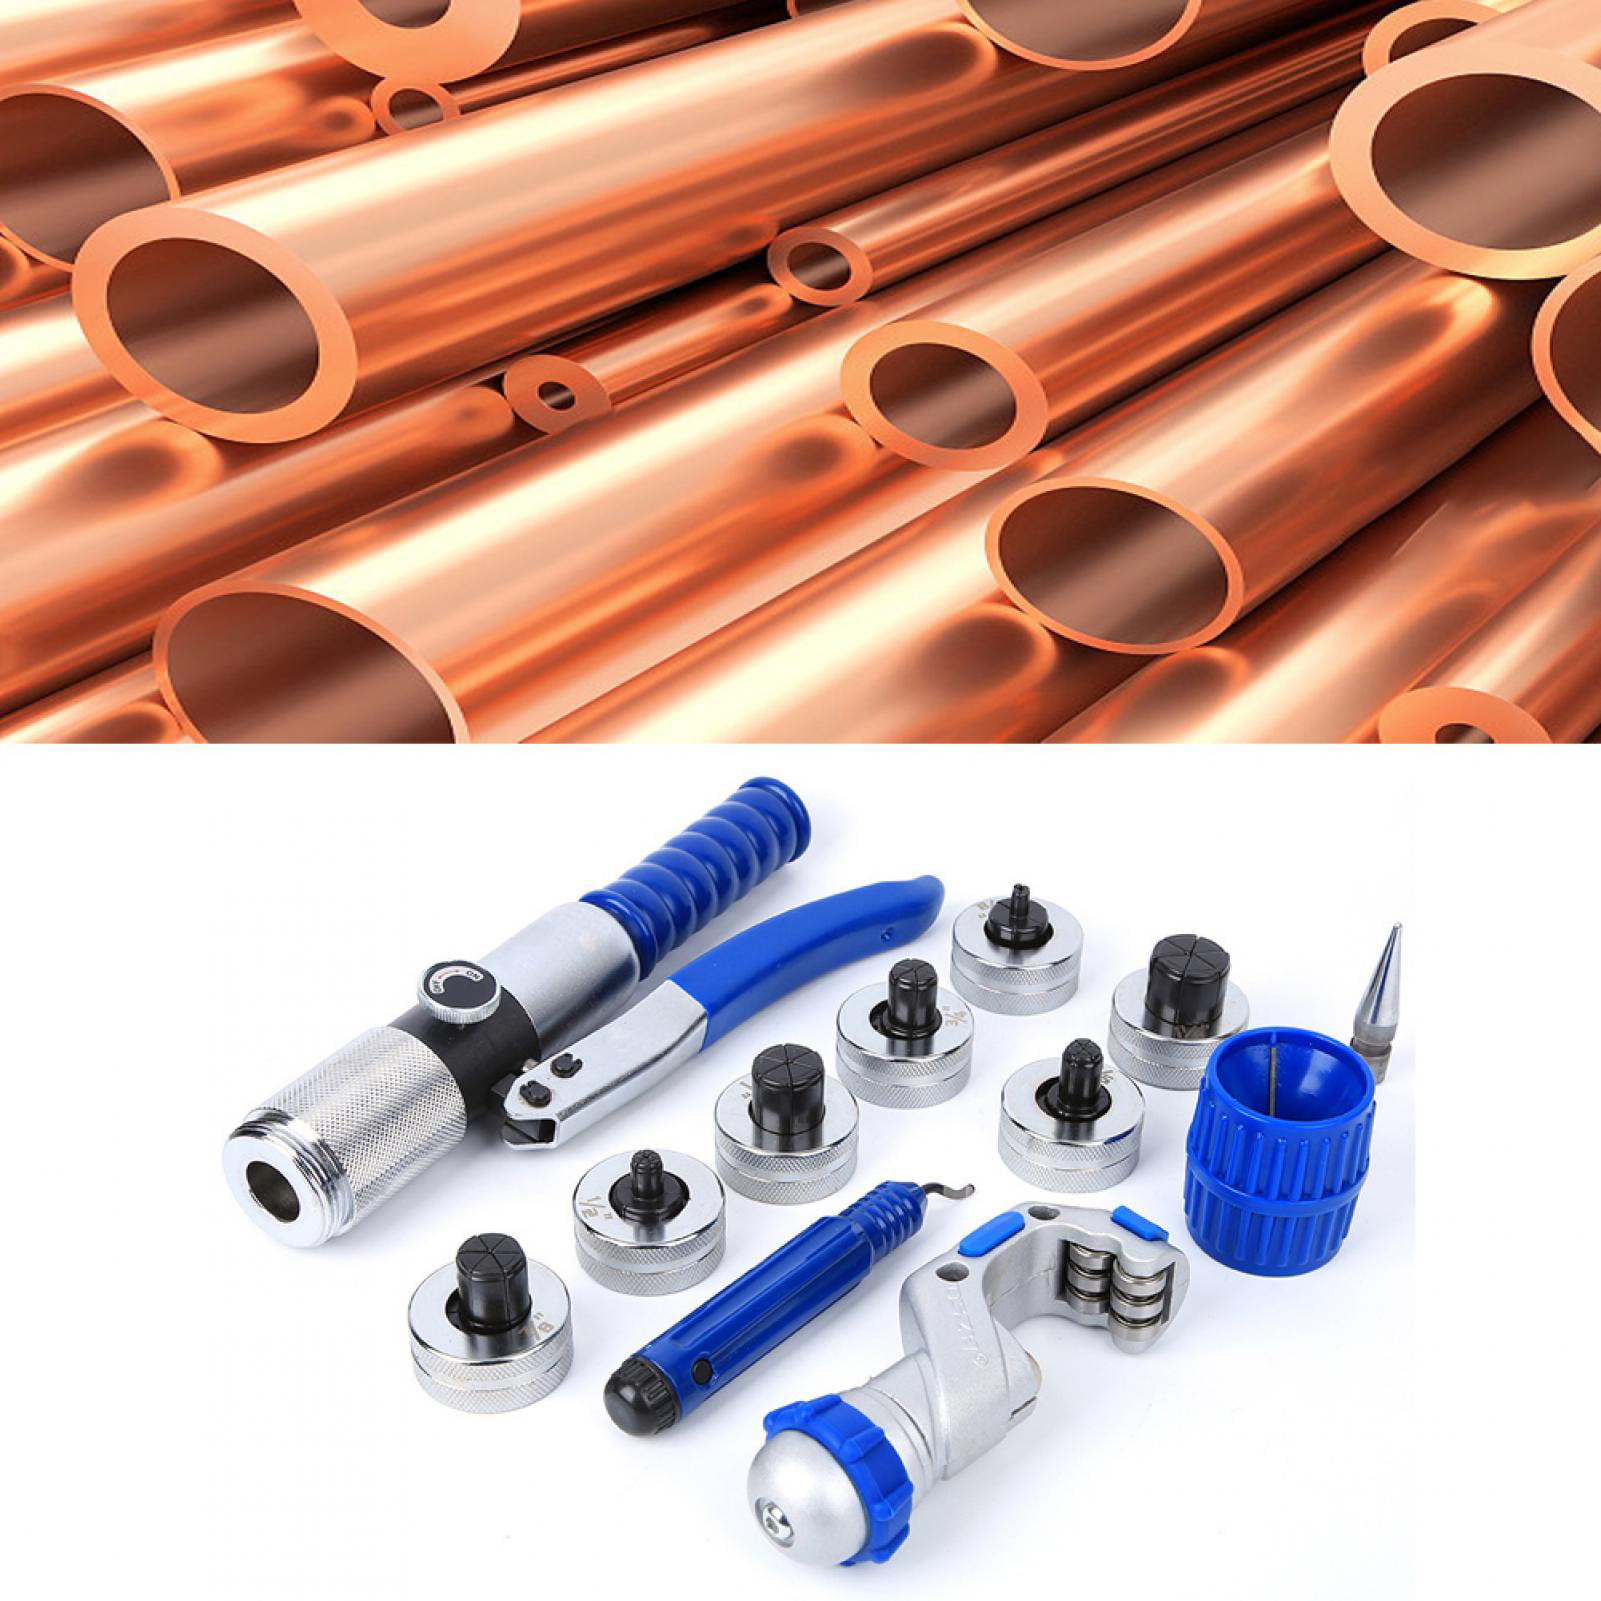 Pipe Flaring Tool Hydraulic Tube Expander 7PCs Expander Heads CT-300A Tubing Expanding Tool 10-28mm with Case for Copper Aluminum Pipes Tubes 